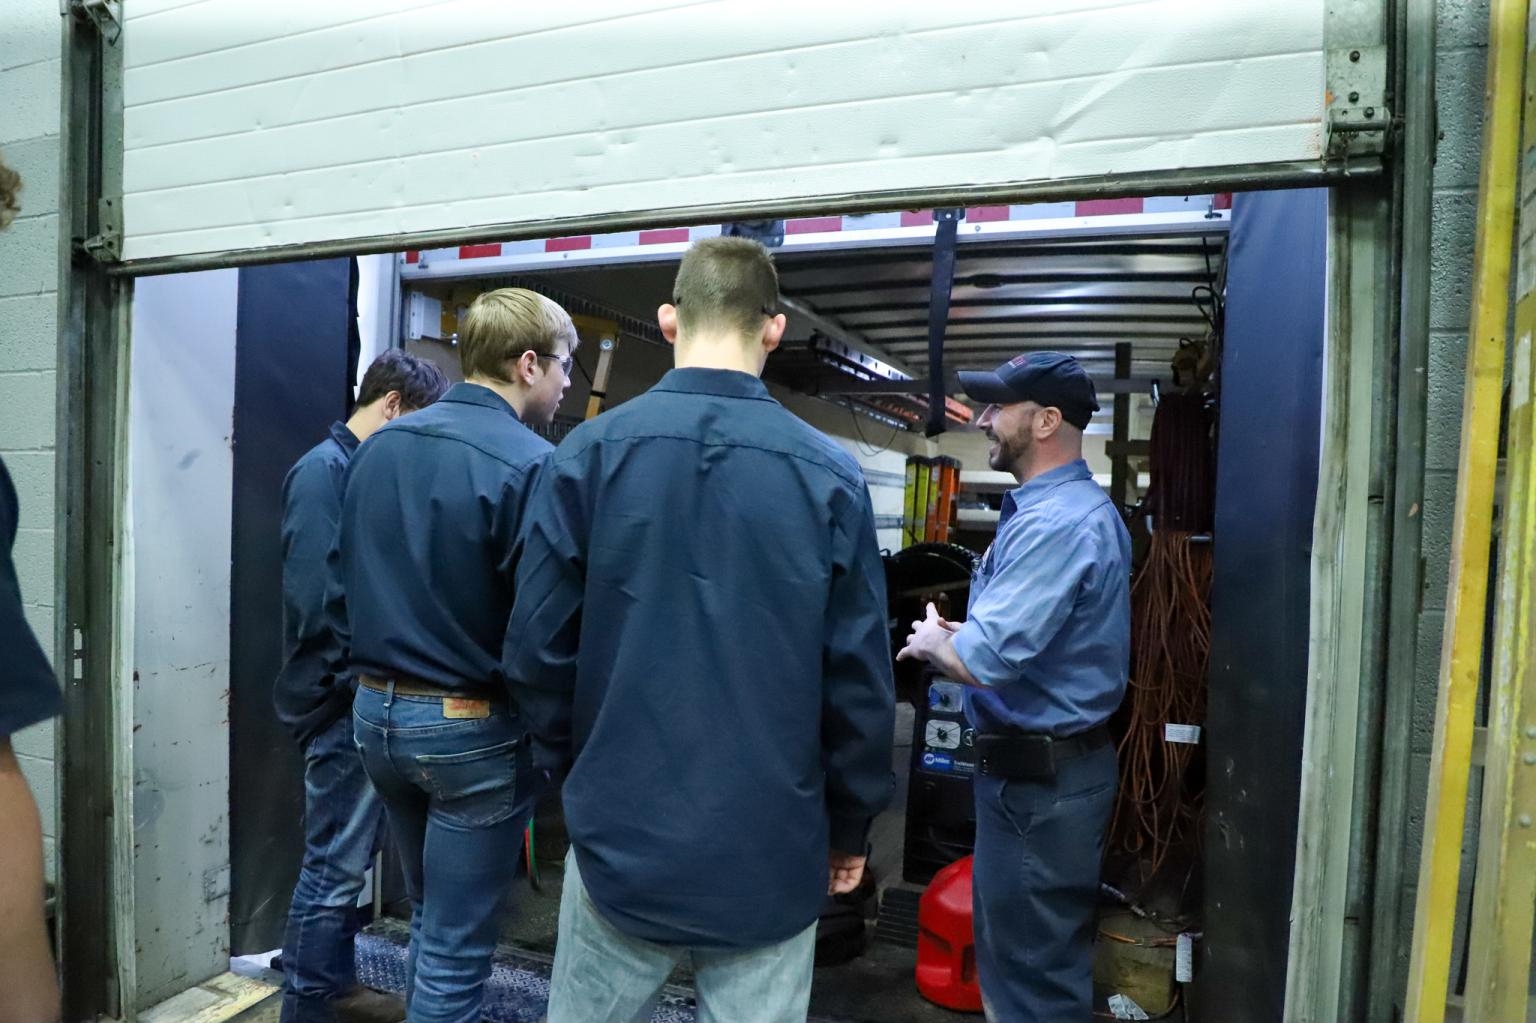 A group of local students lead a tour at our Jarrett Fleet Services location in Seville.